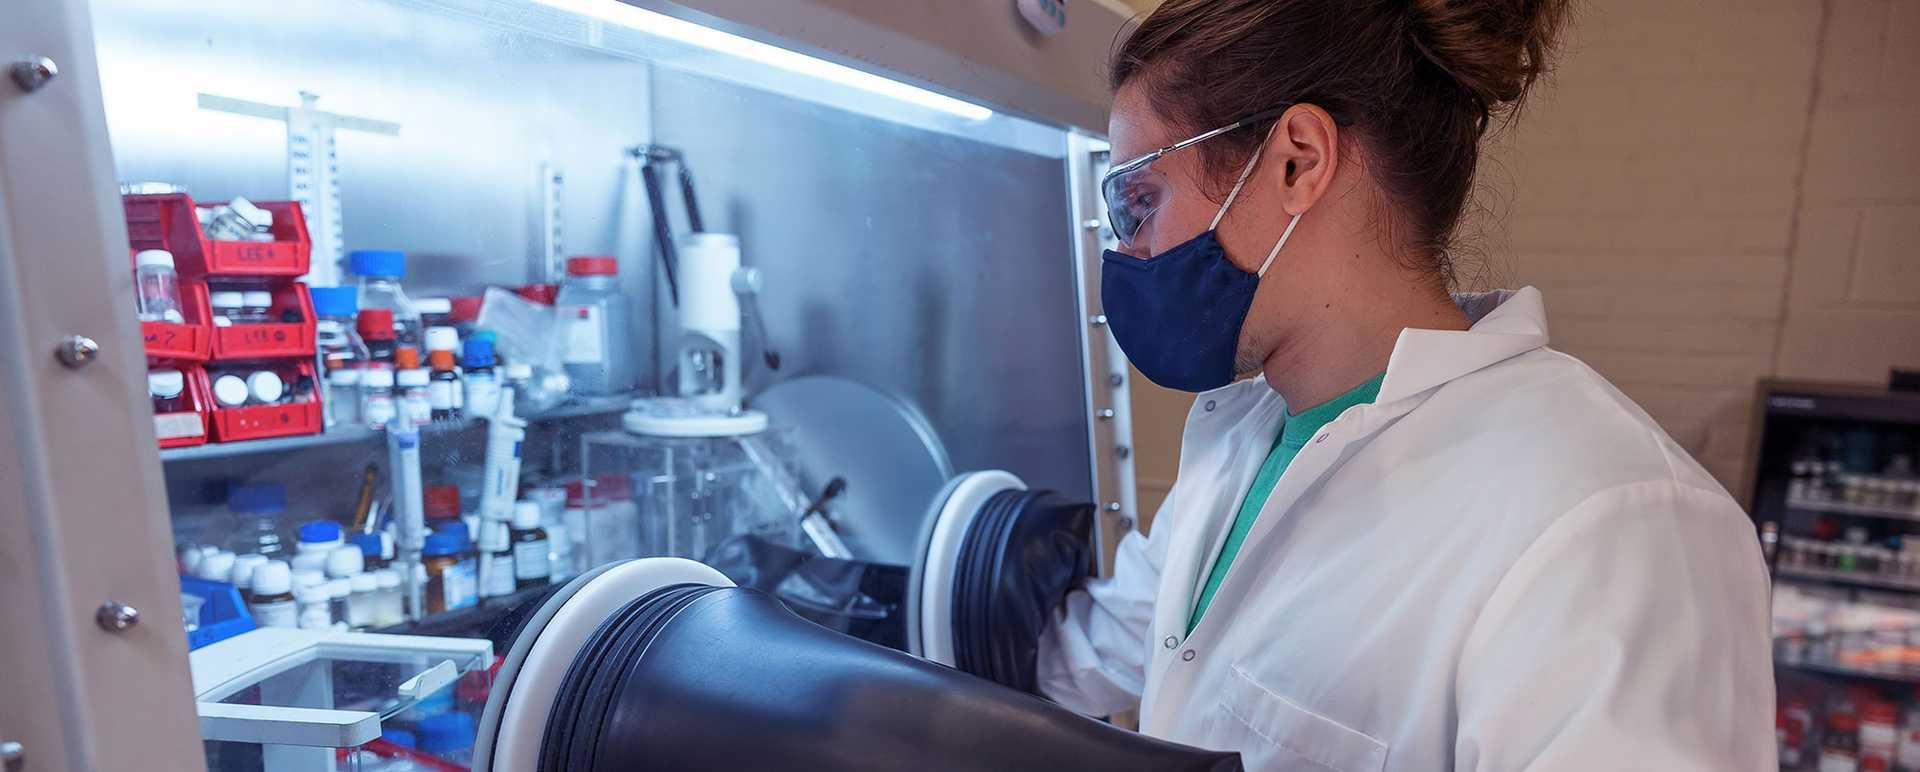 Photo of a Case Western Reserve University student wearing a facemask and goggles, working in a research lab